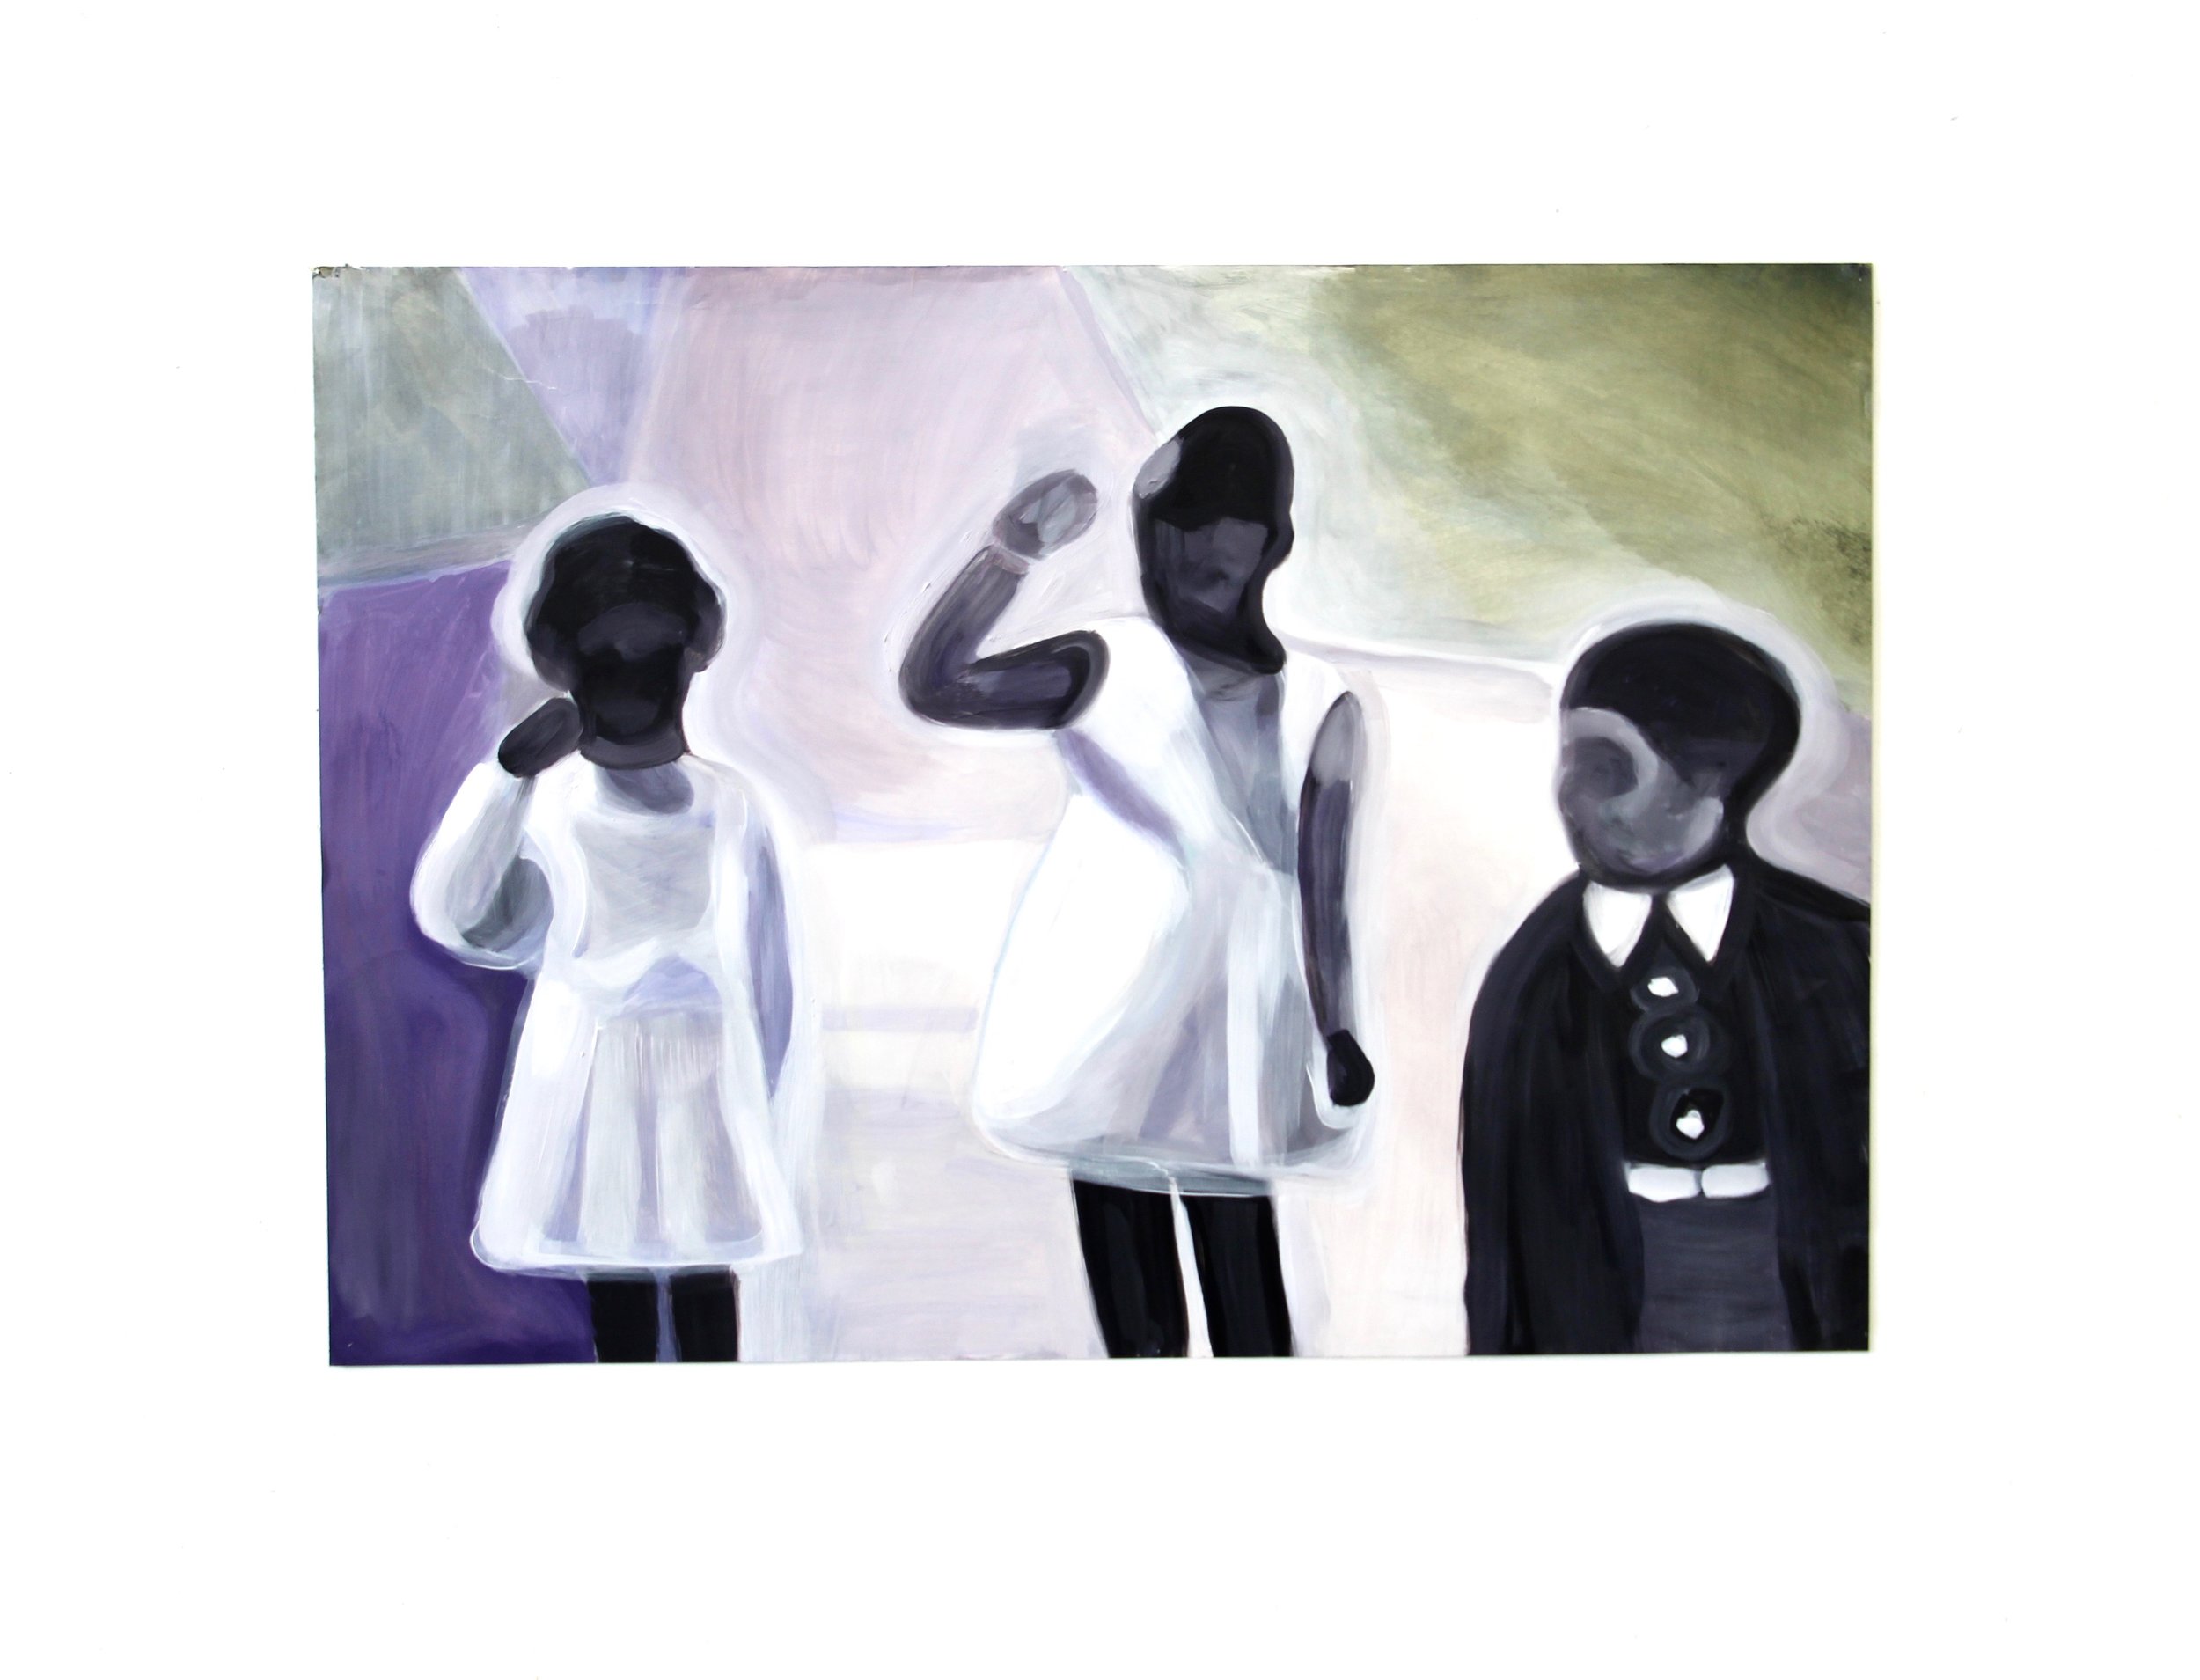   Three Children , 2018 Oil on paper 24 x 30 inches 61 x 76 cm (approximately)  